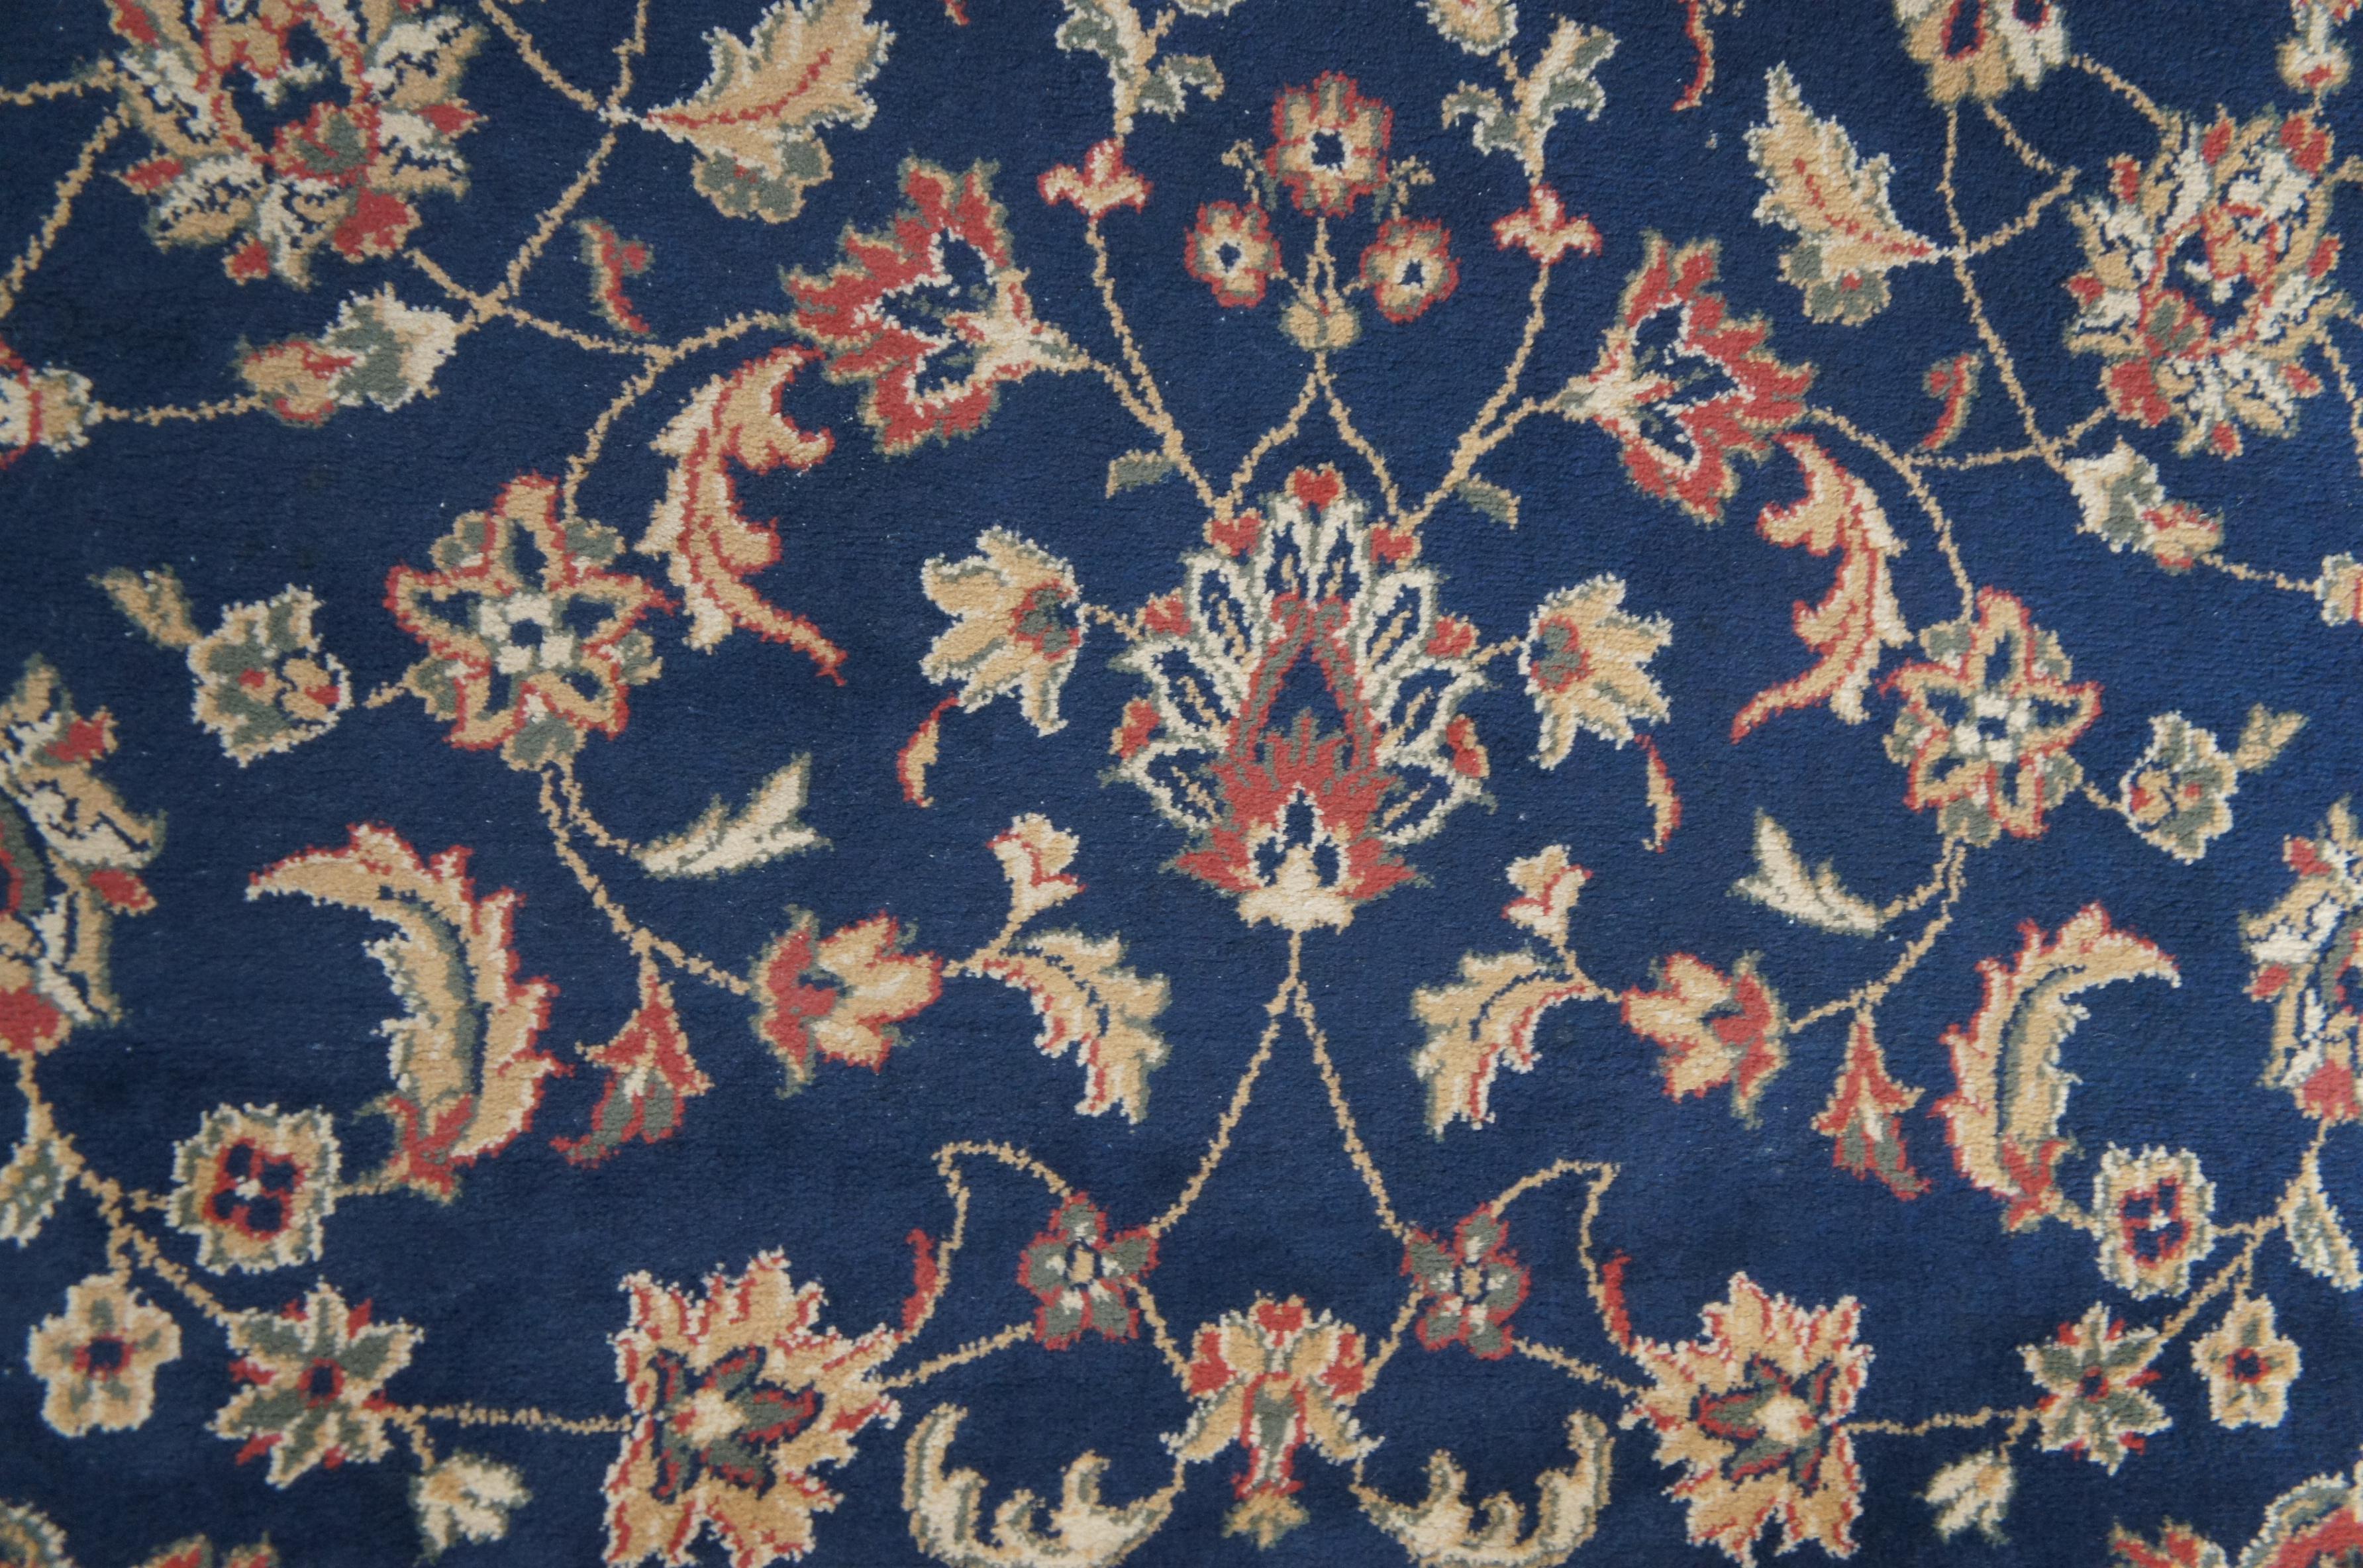 20th Century Vintage Royal Persian Sarouk Navy Floral All Over Navy Area Rug Carpet 5' x 8' For Sale